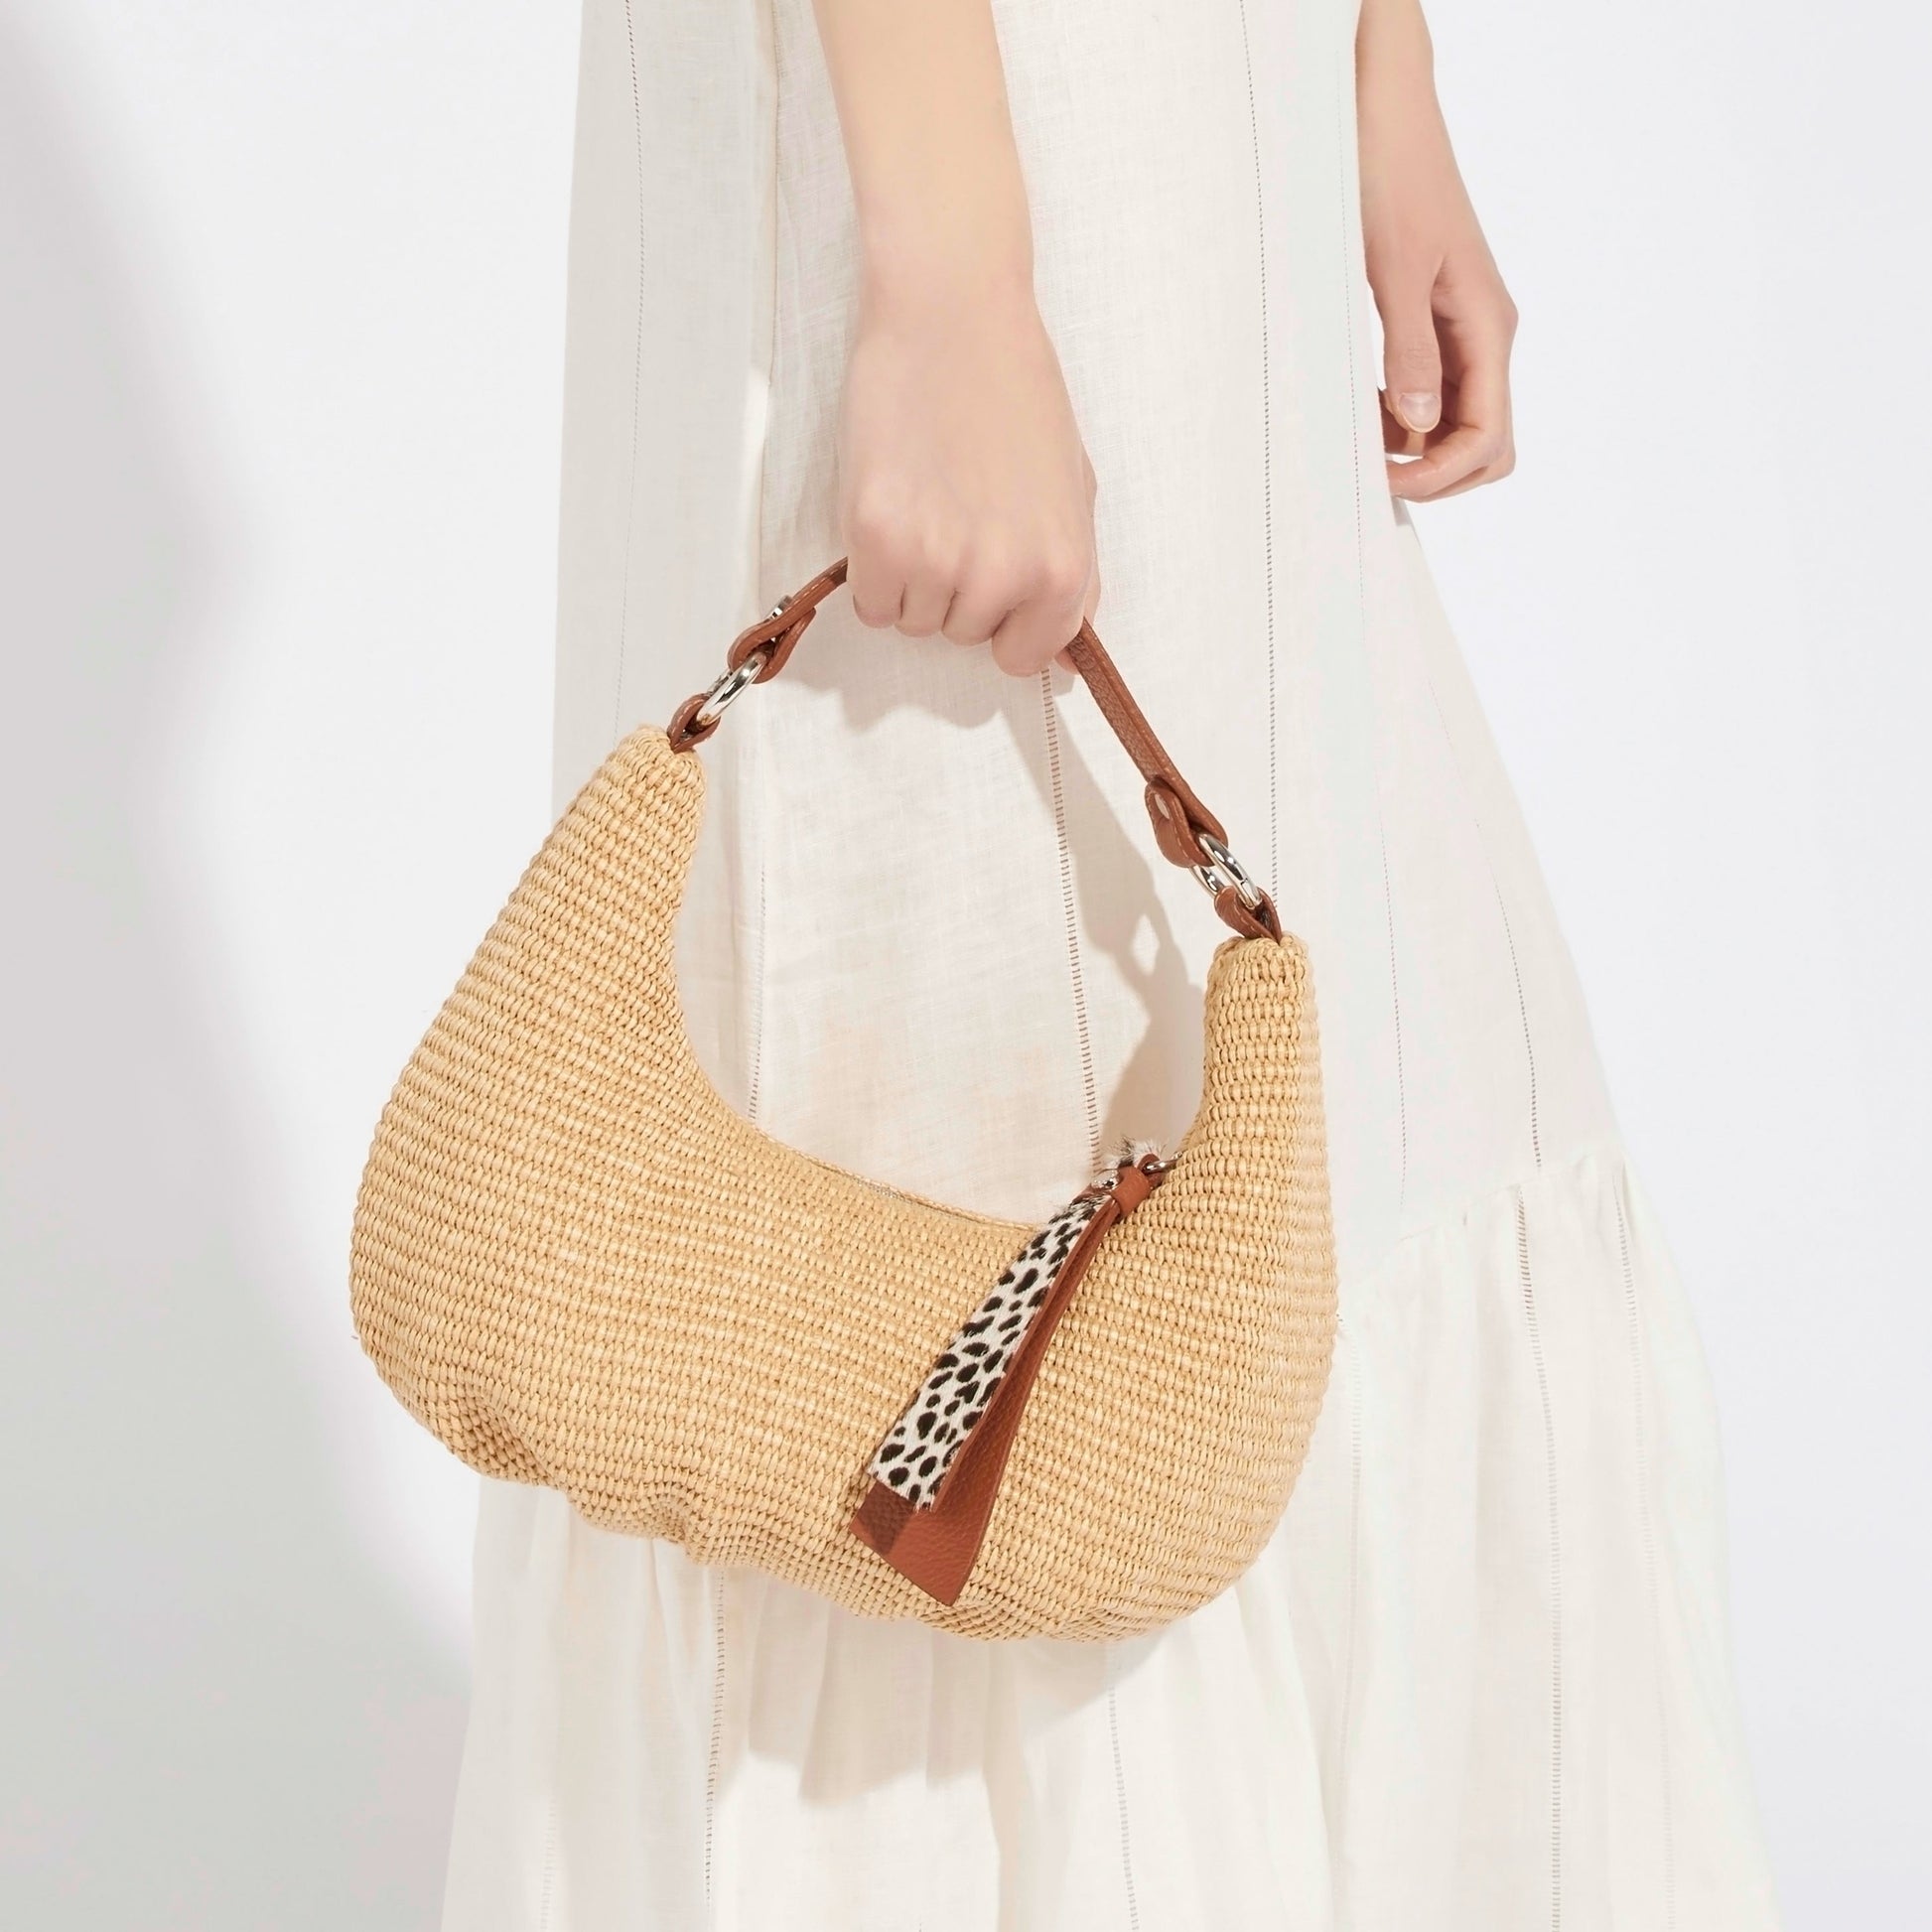 The Beatrice Hobo small bag in natural raffia is the cutest bag from Roberta Gandolfi part of the collection by Mazzi d Fiori  